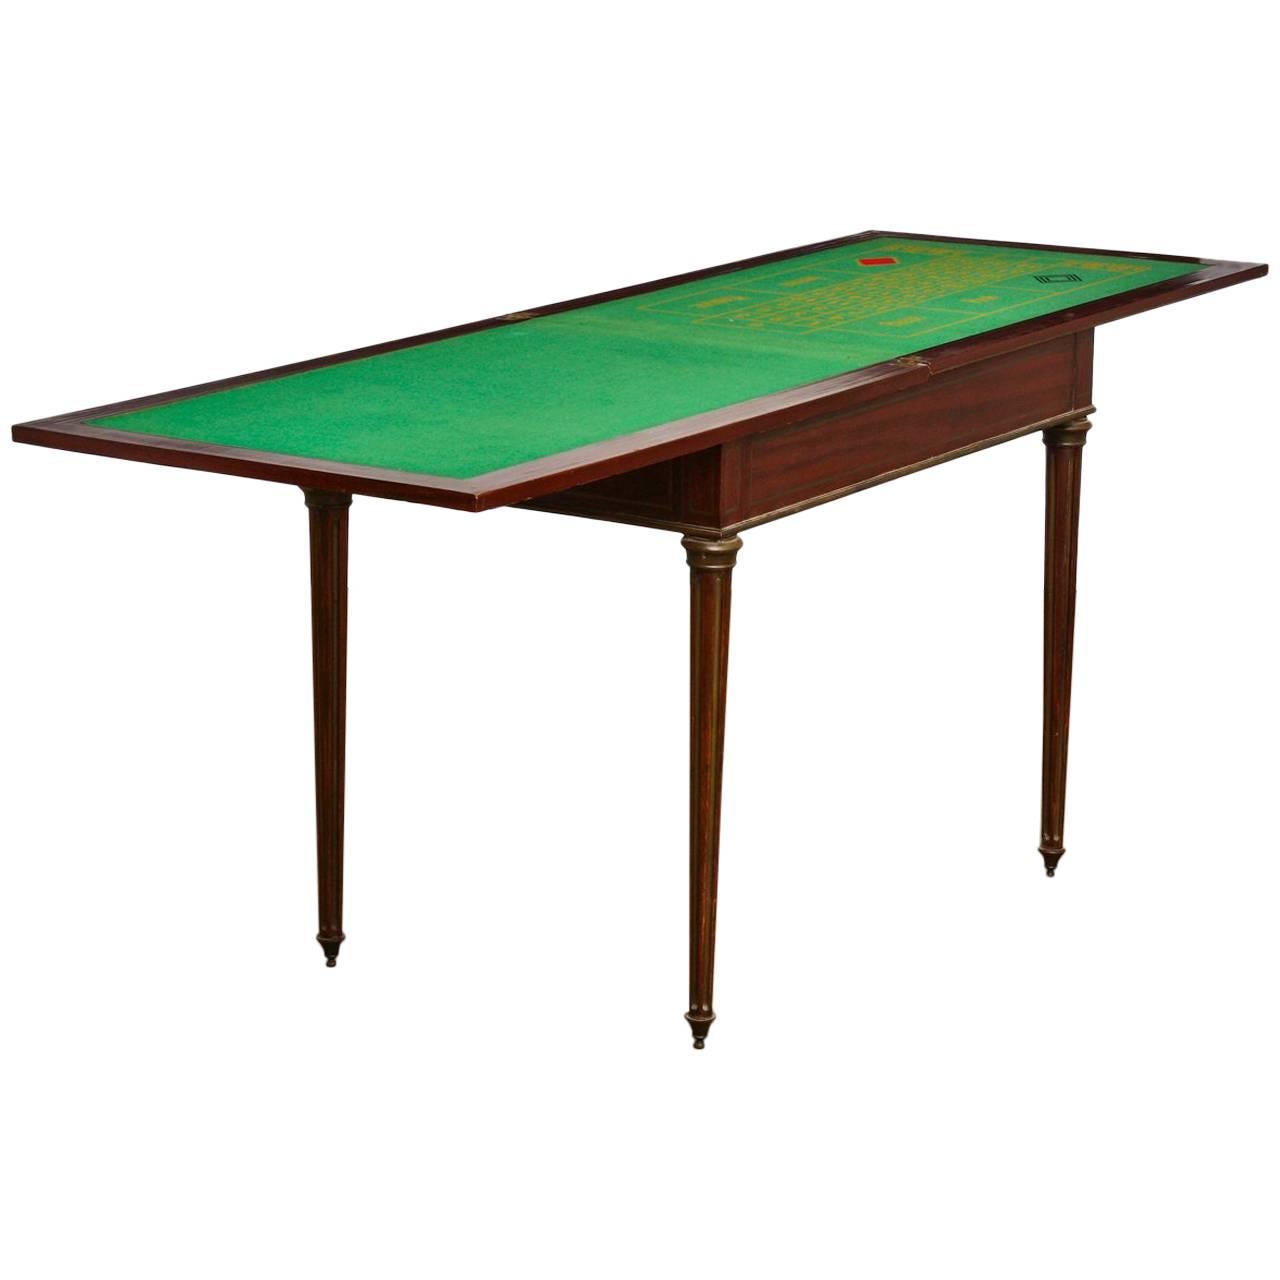 French Regency Neoclassical Flip-Top Roulette Game Table